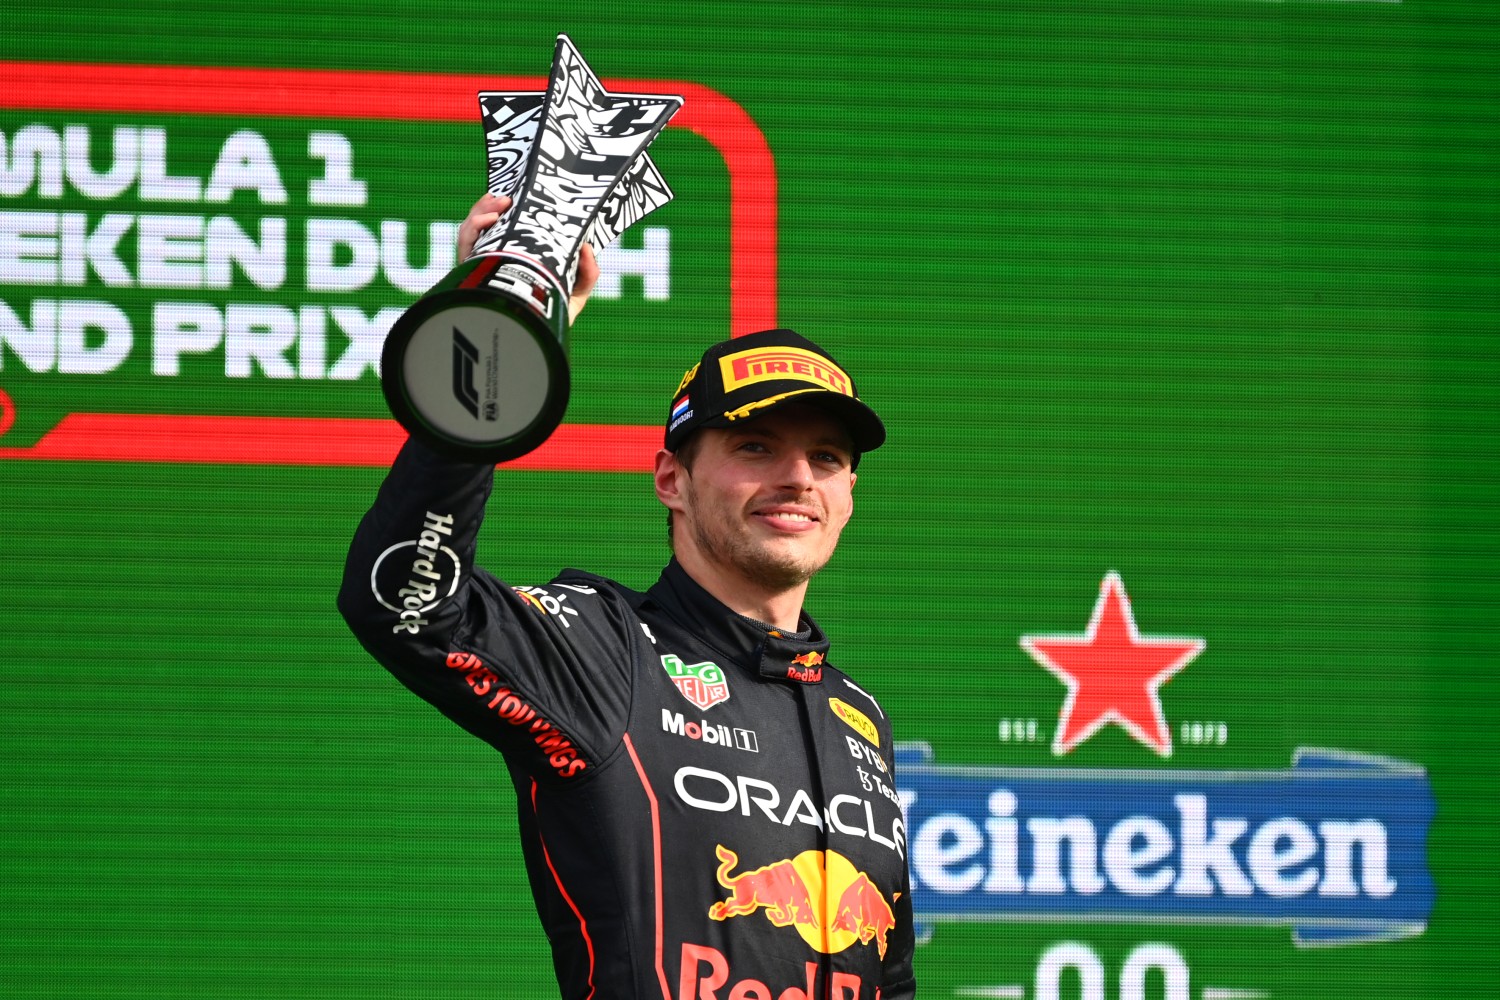 2022 Dutch GP Race winner Max Verstappen of the Netherlands and Oracle Red Bull Racing celebrates on the podium during the F1 Grand Prix of The Netherlands at Circuit Zandvoort on September 04, 2022 in Zandvoort, Netherlands. (Photo by Dan Mullan/Getty Images)